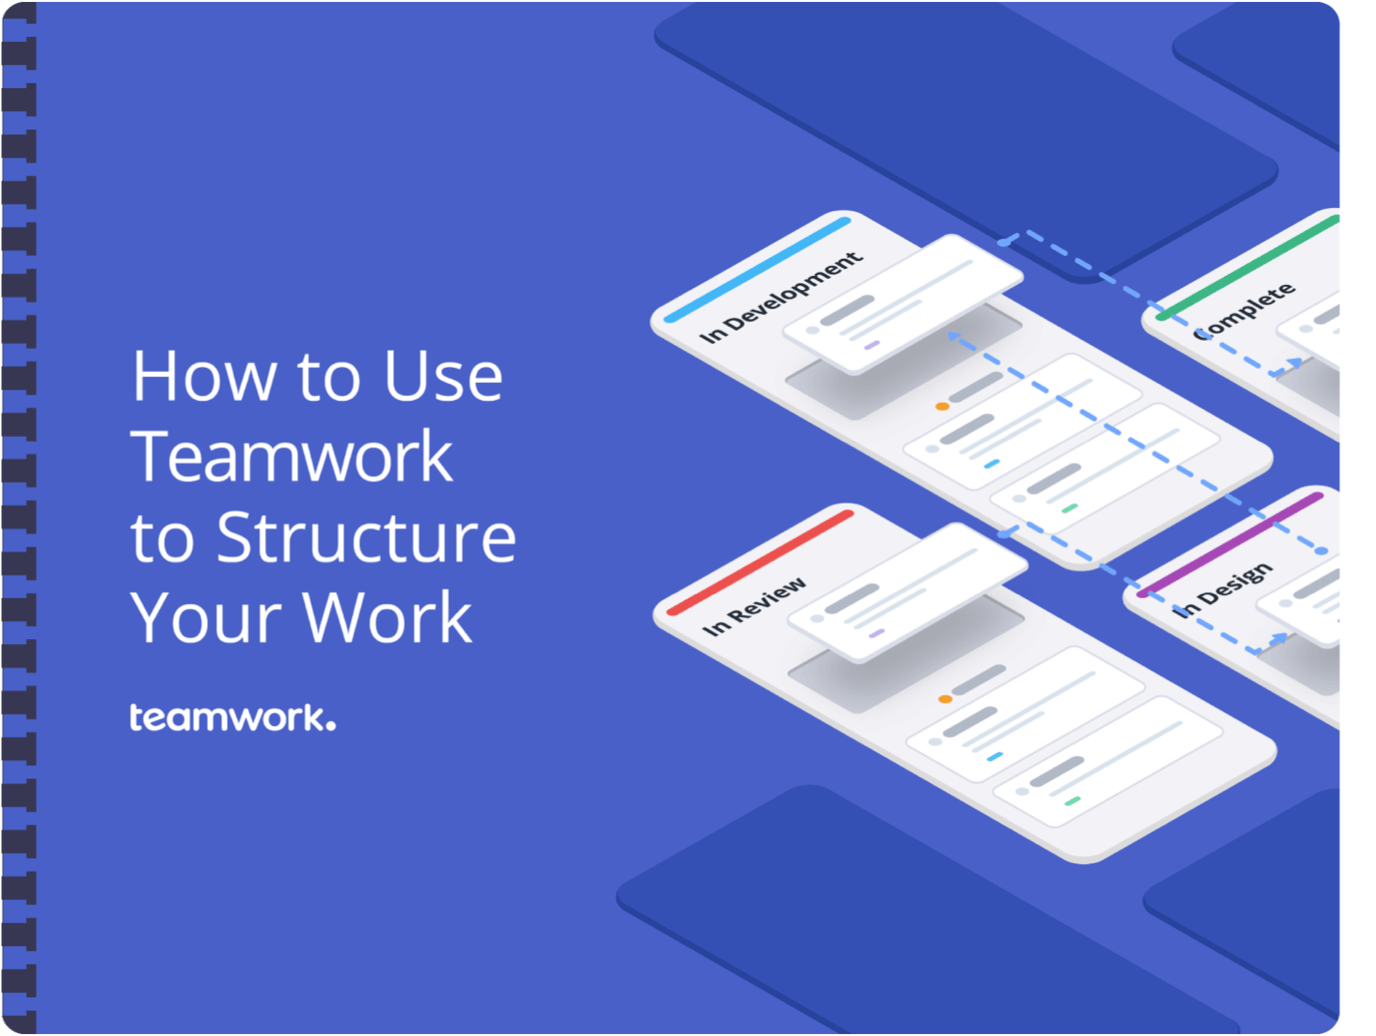 How to structure your work using Teamwork.com